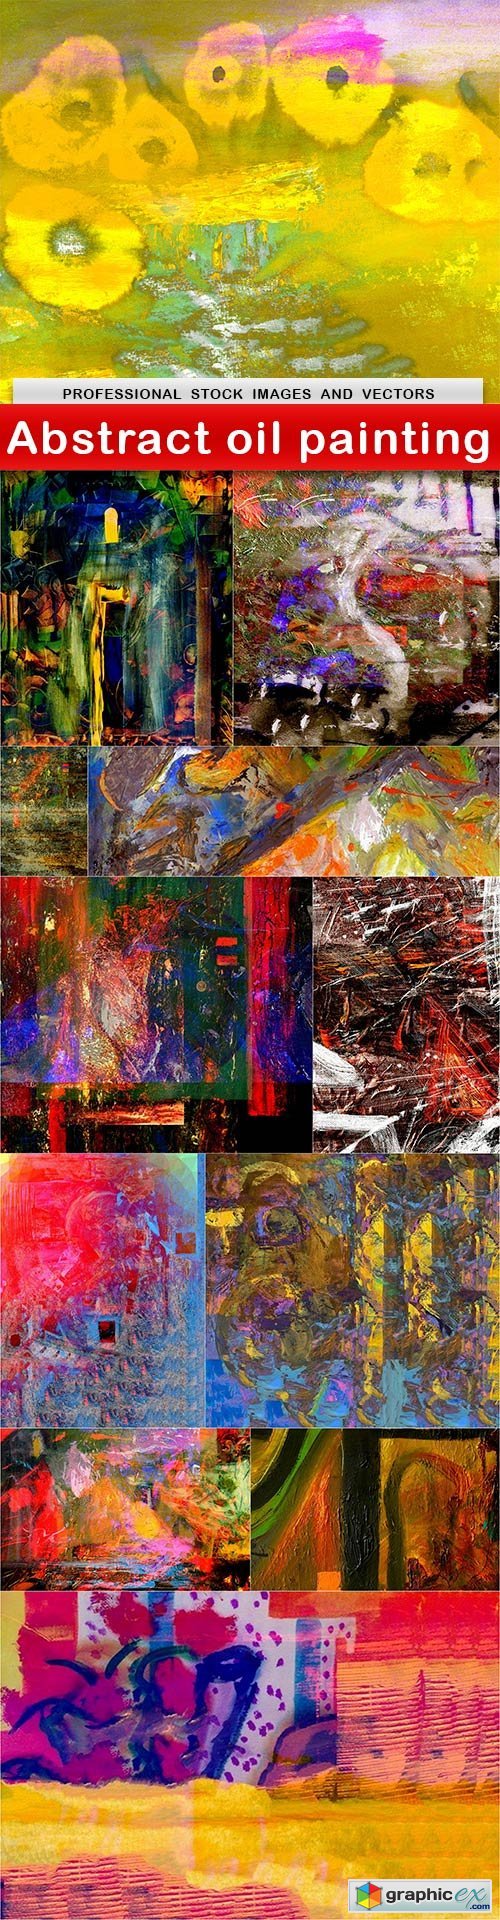 Abstract oil painting - 12 UHQ JPEG